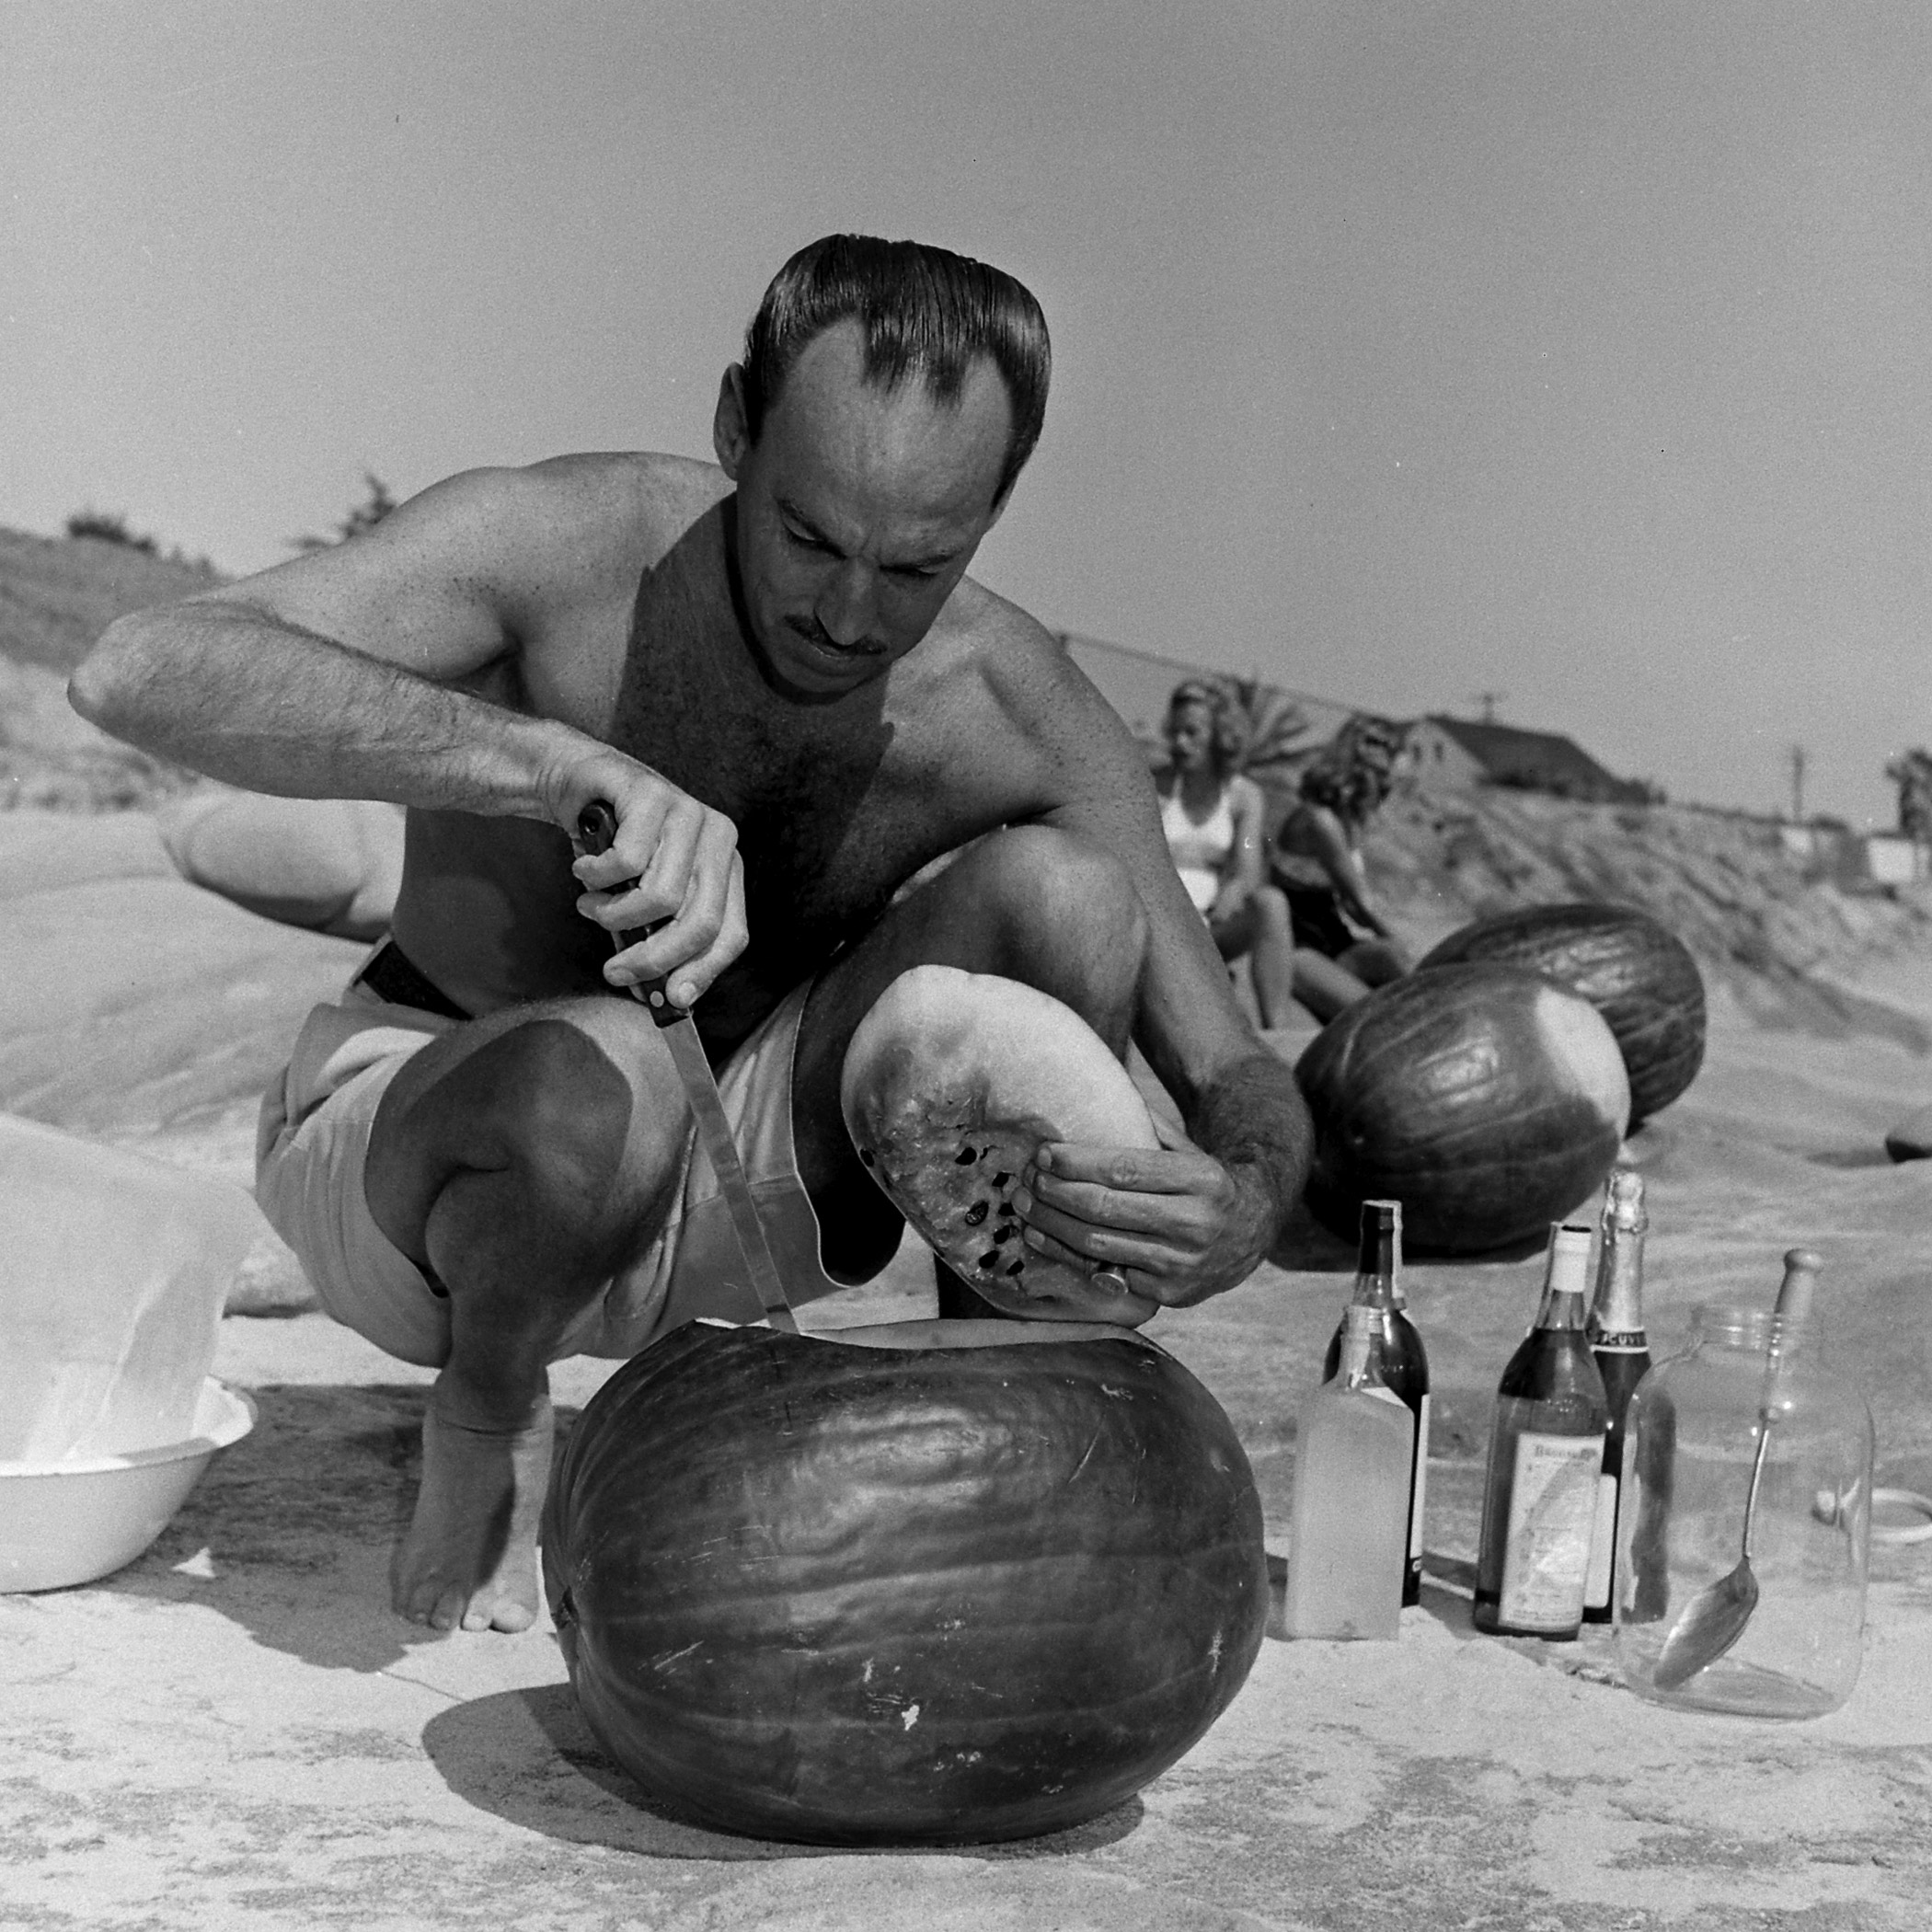 Spiked watermelon beach party in San Diego, 1948.